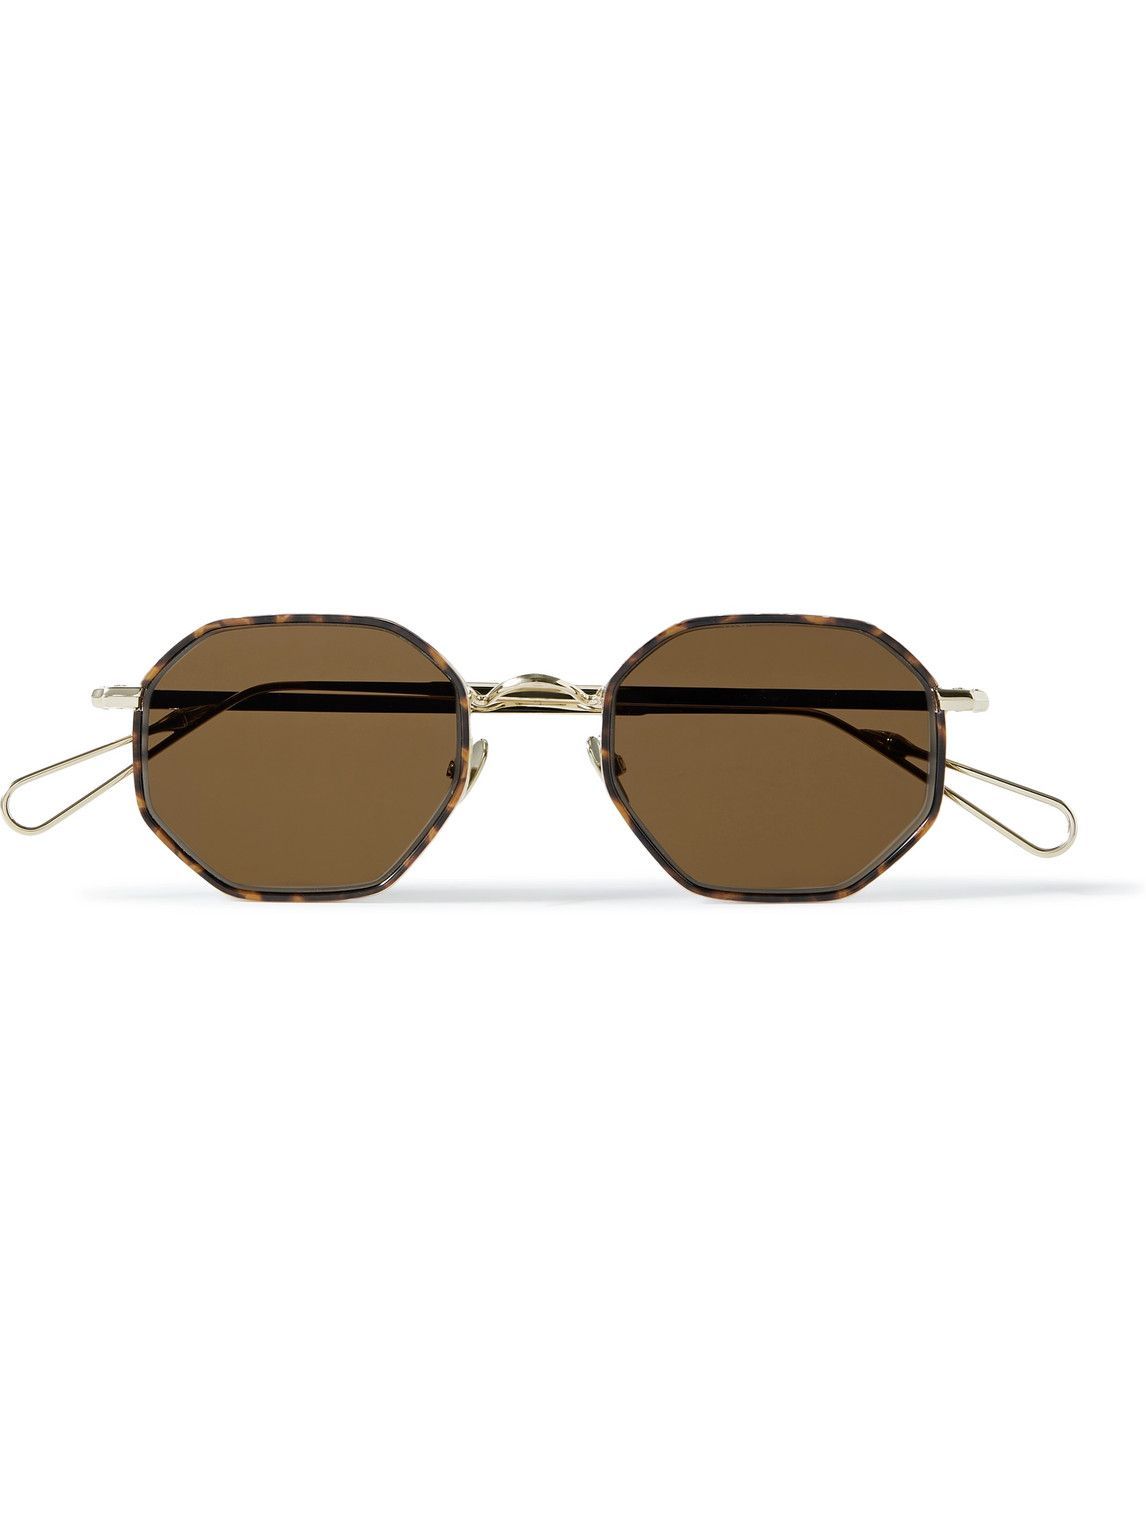 AHLEM - Luxembourg Octagon-Frame Tortoiseshell Acetate and Gold-Tone ...